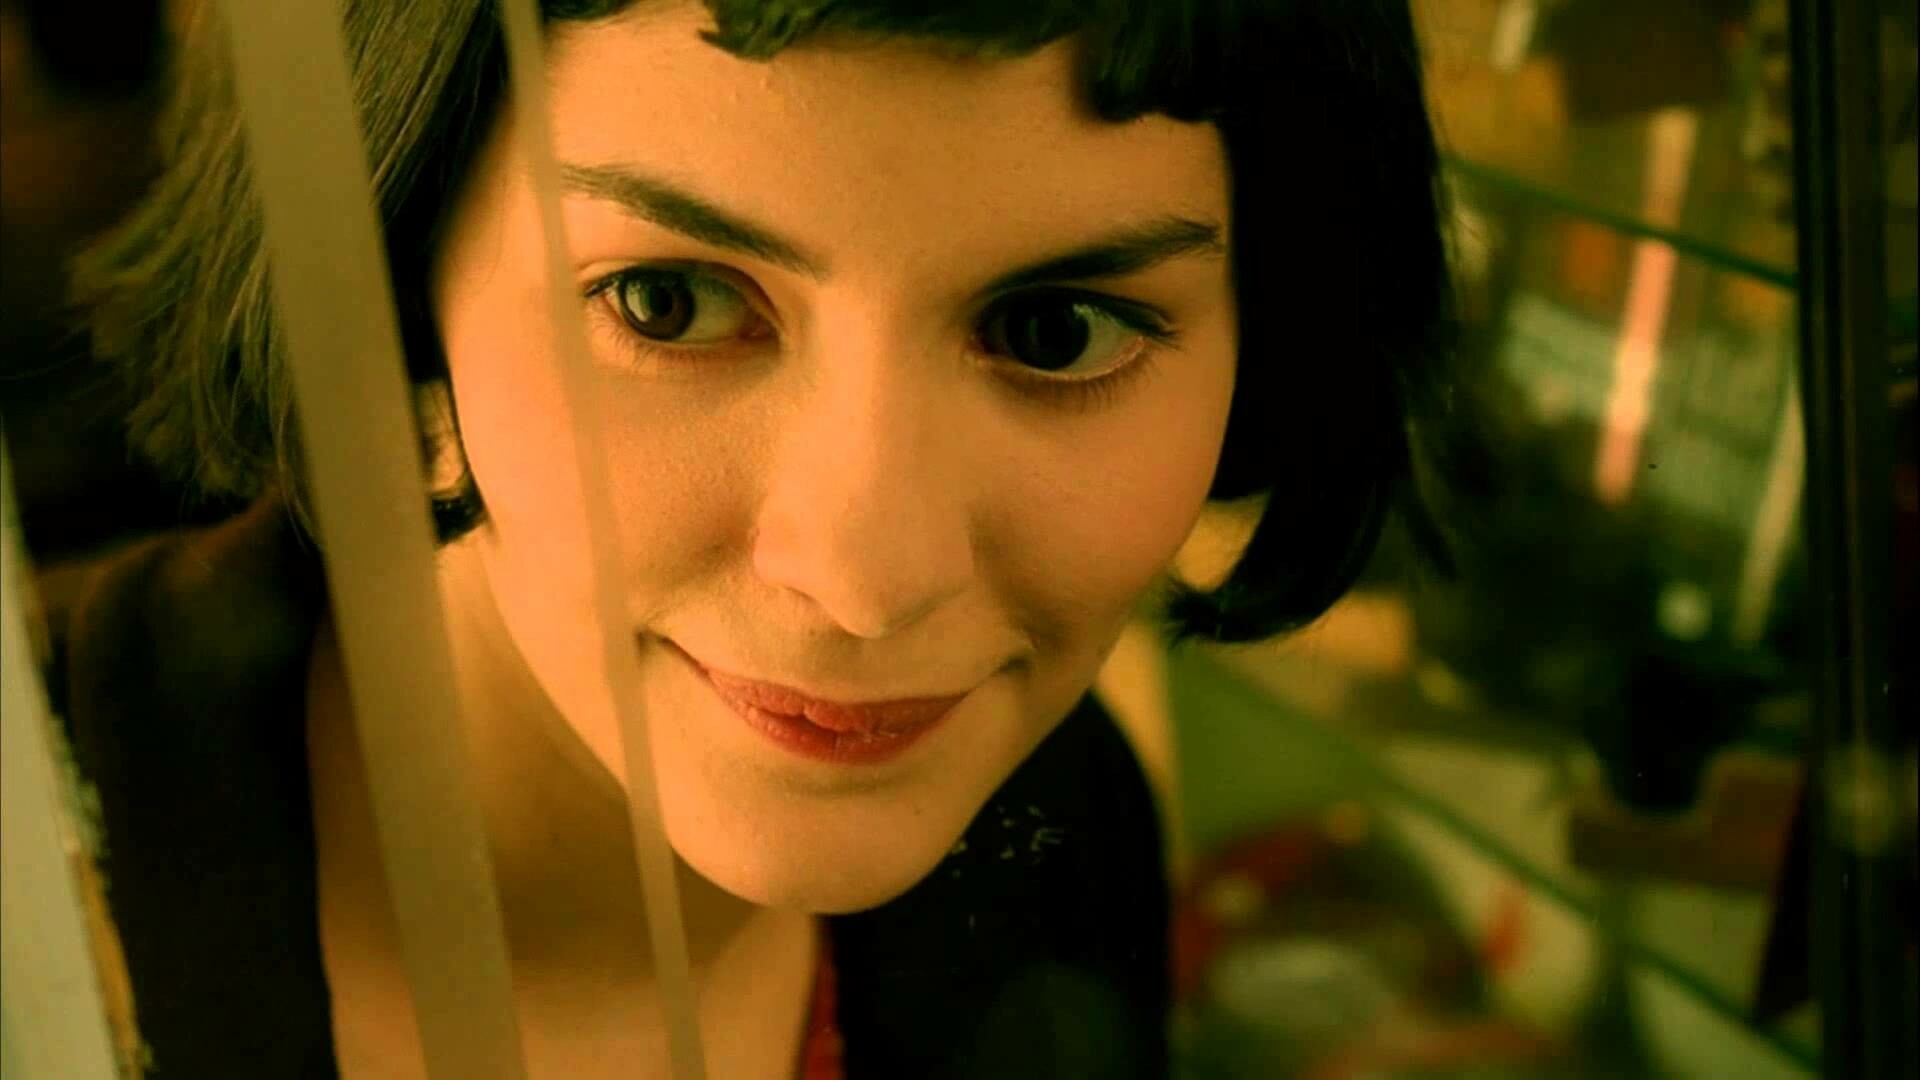 Amelie: The movie won Best Film award at the European Film Awards. 1920x1080 Full HD Background.